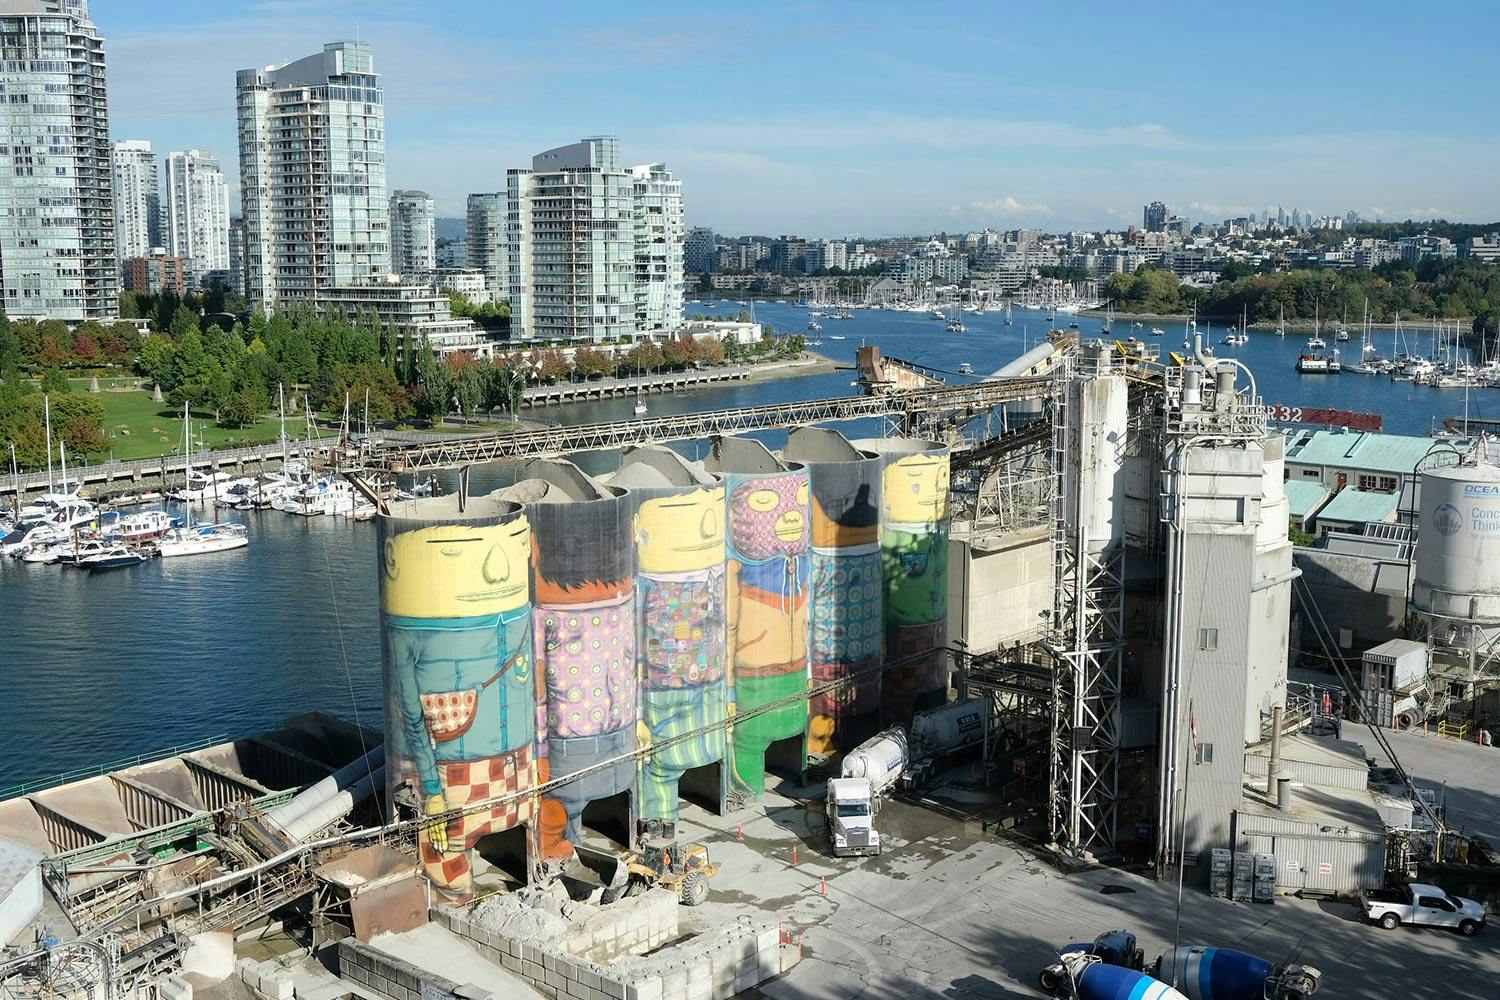 Murals of giant people on 6 silos at a waterfront concrete facility. In the background are a park and apartment towers.